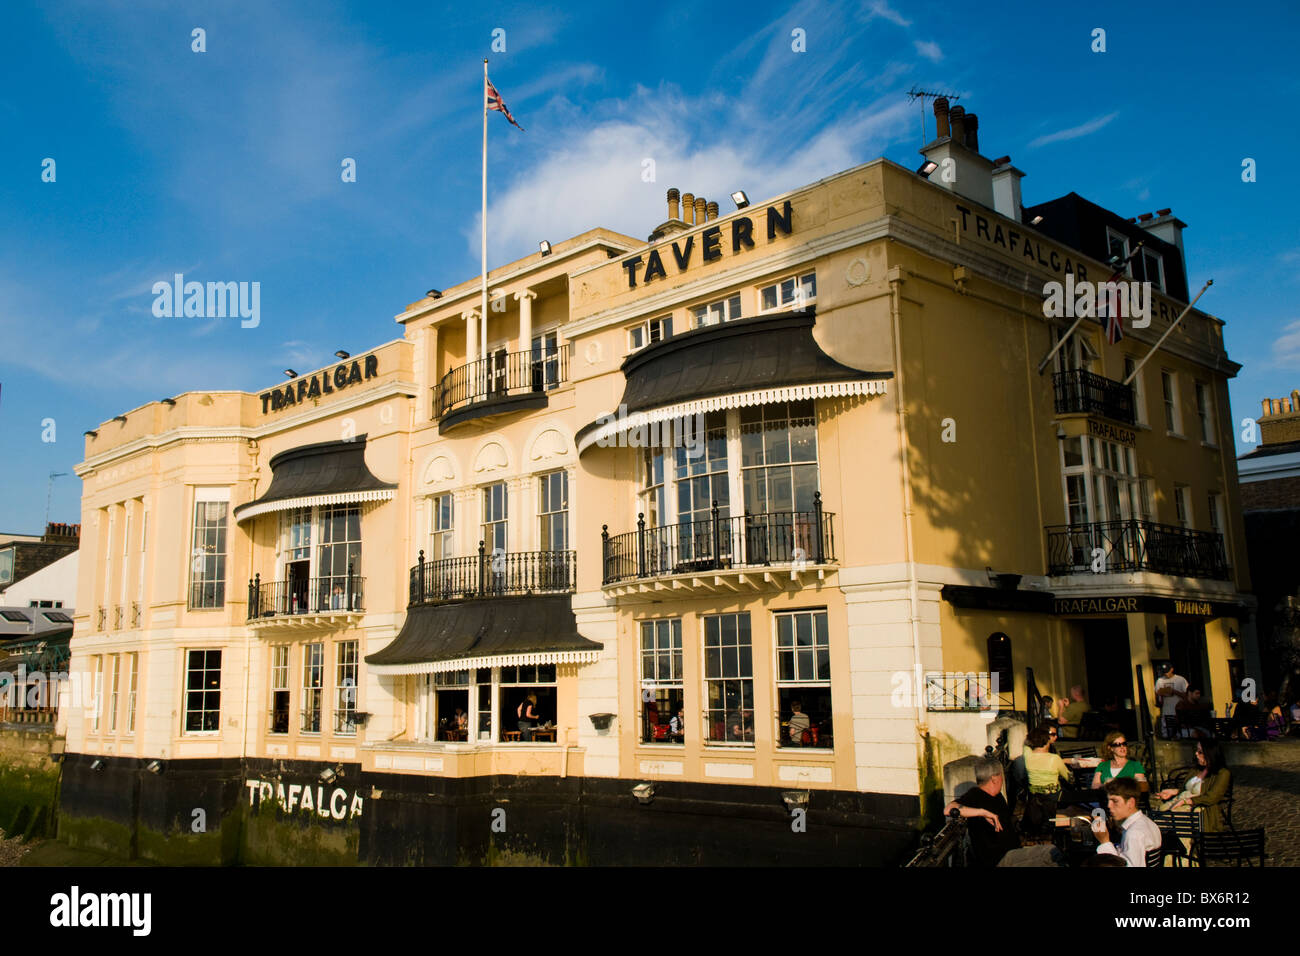 Trafalgar Tavern, a popular public house on the bank of the River Thames in Greenwich, London Stock Photo